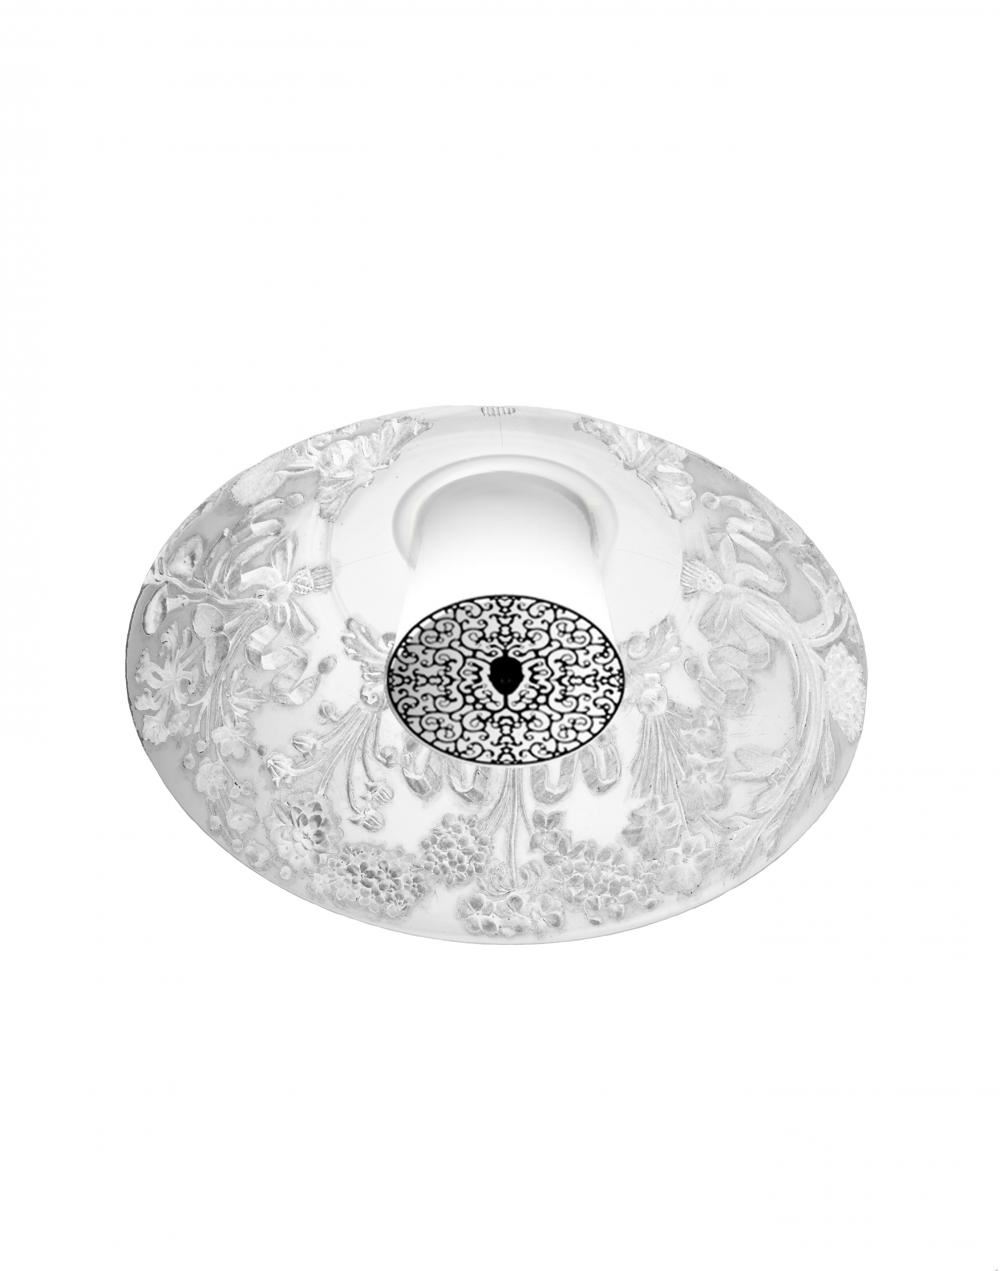 Skygarden Recessed Ceiling Light Gy635